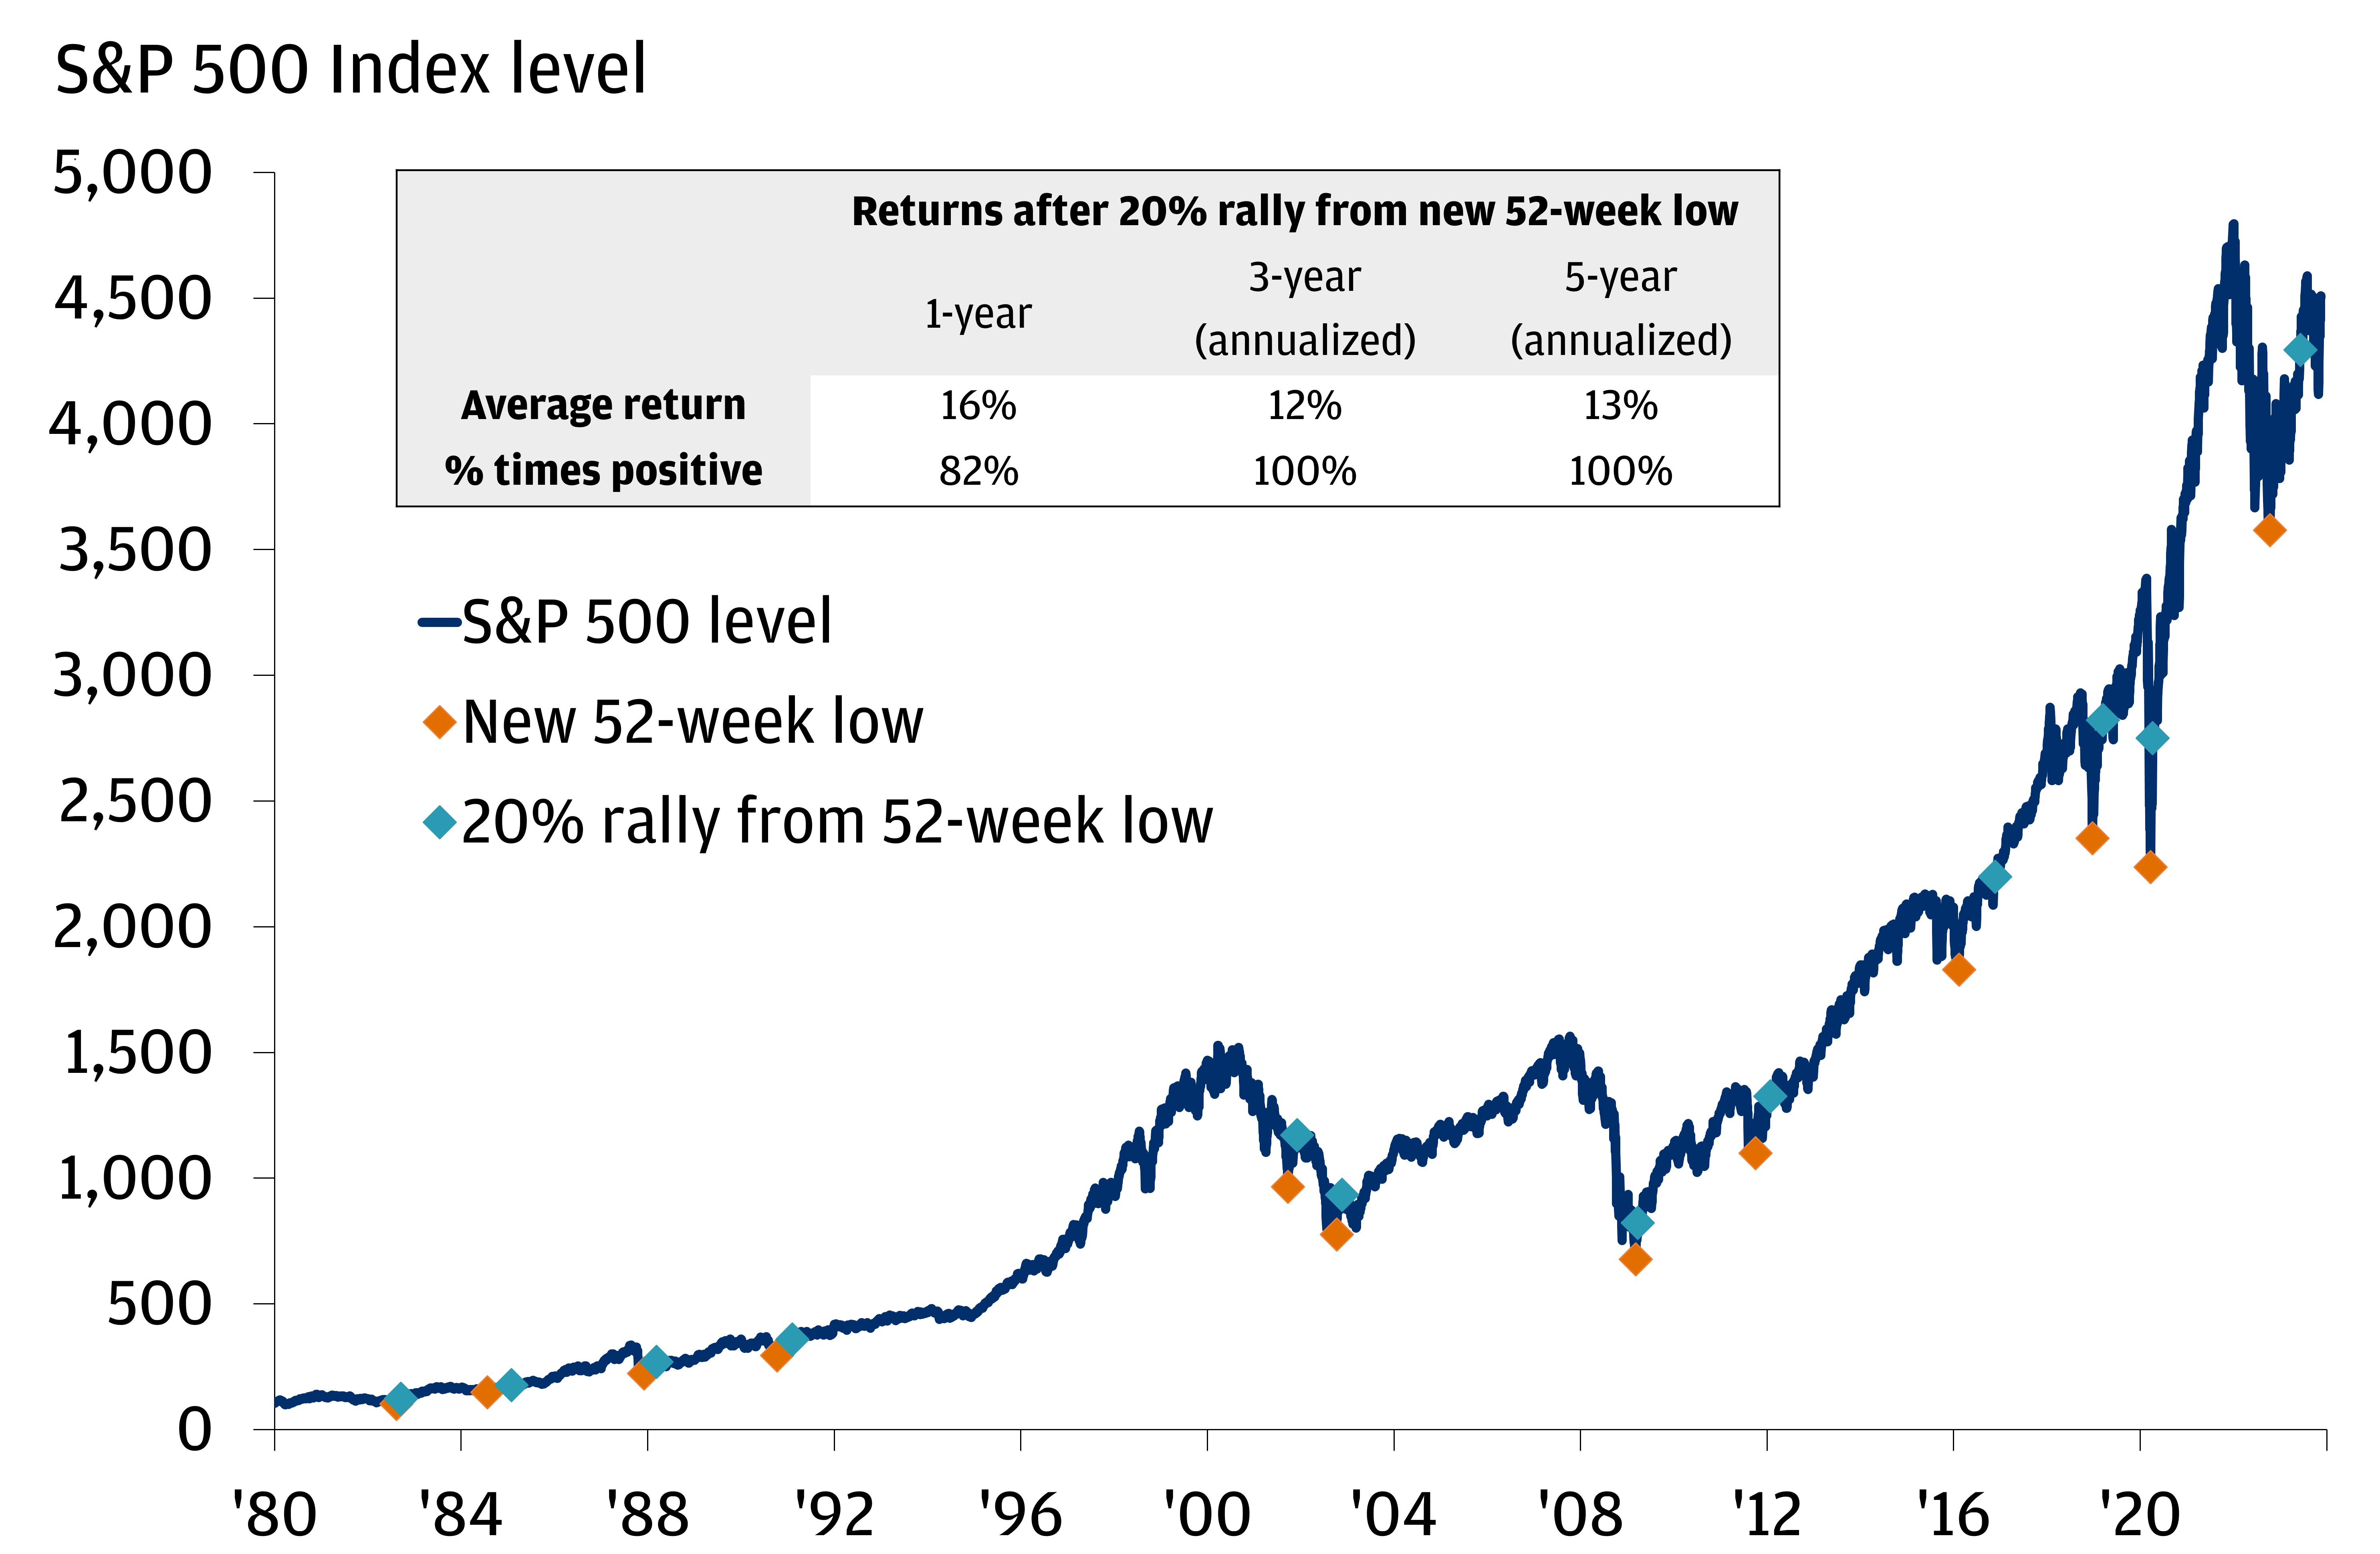 This chart shows the S&P 500 index and its intra-year highs since 1980. 